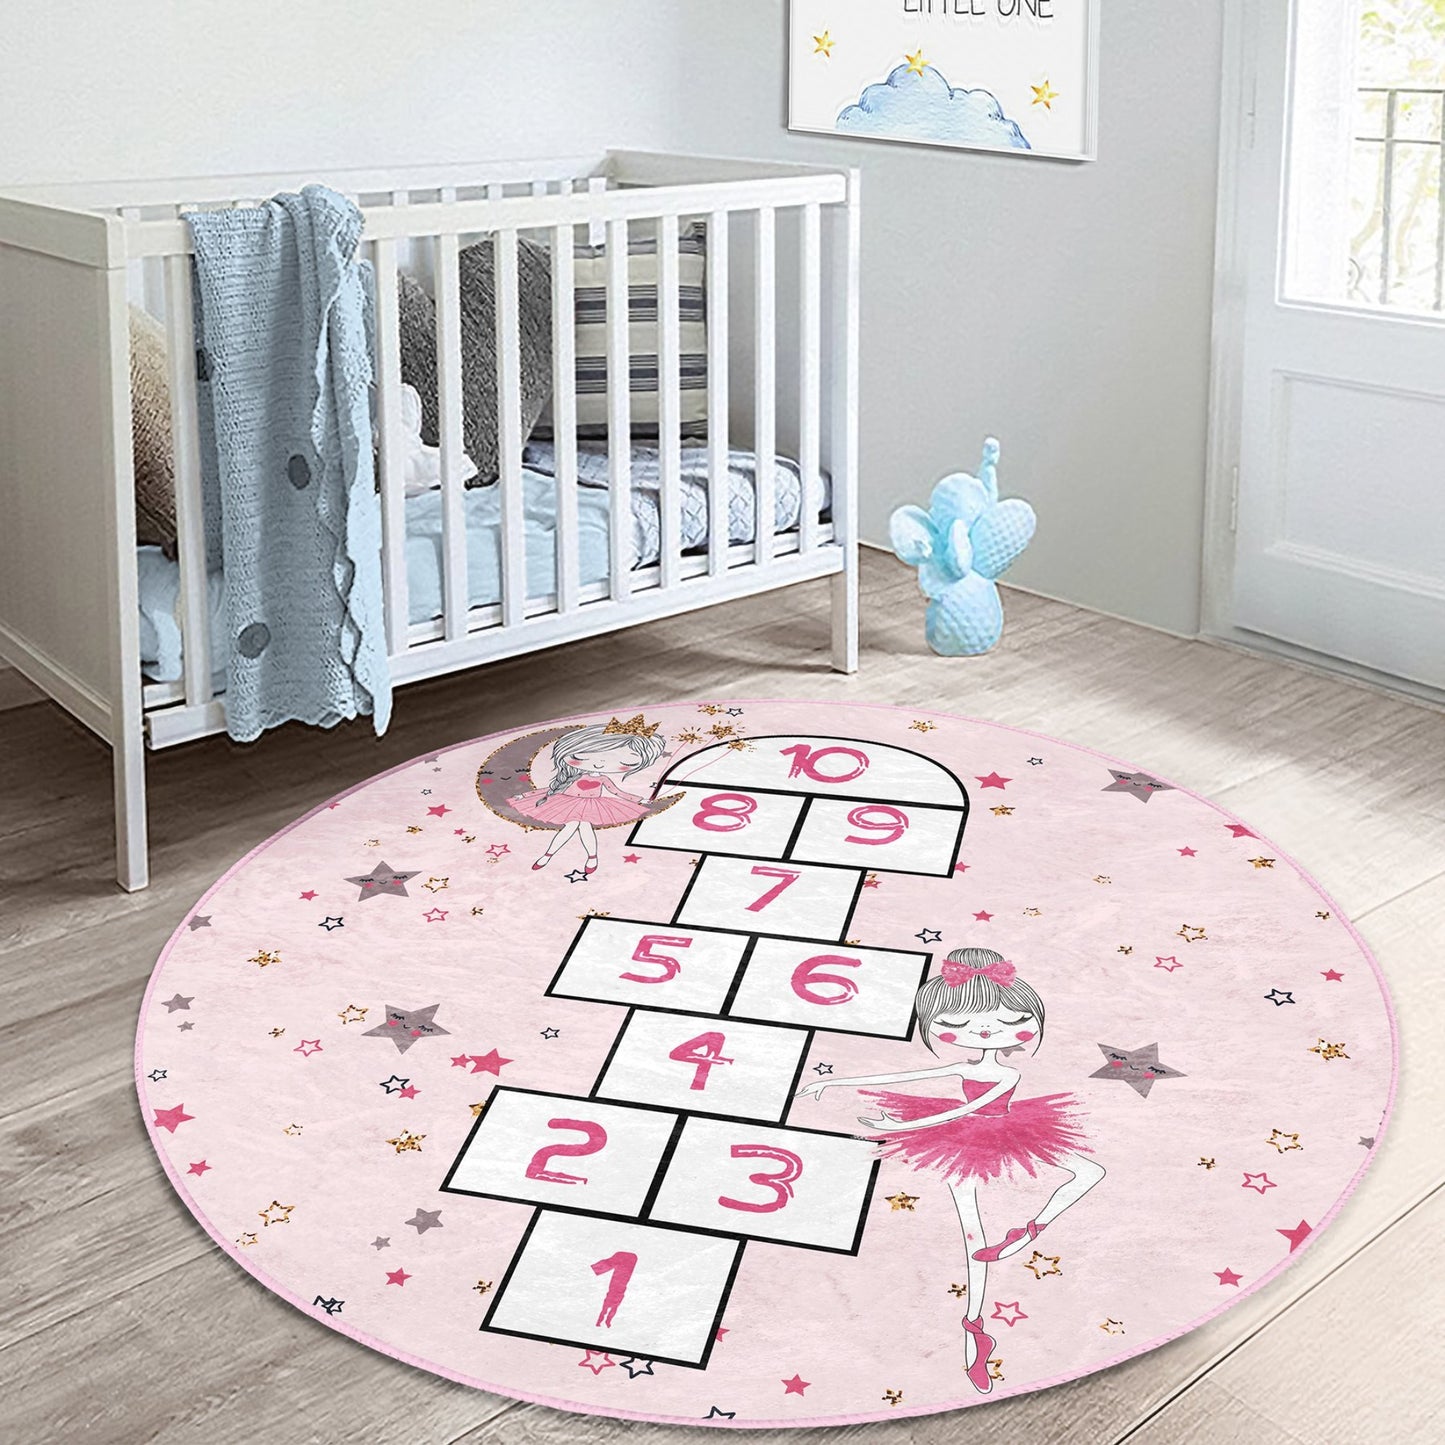 Round Pink Hopscotch Patterned Floor Rug - Charming Charm